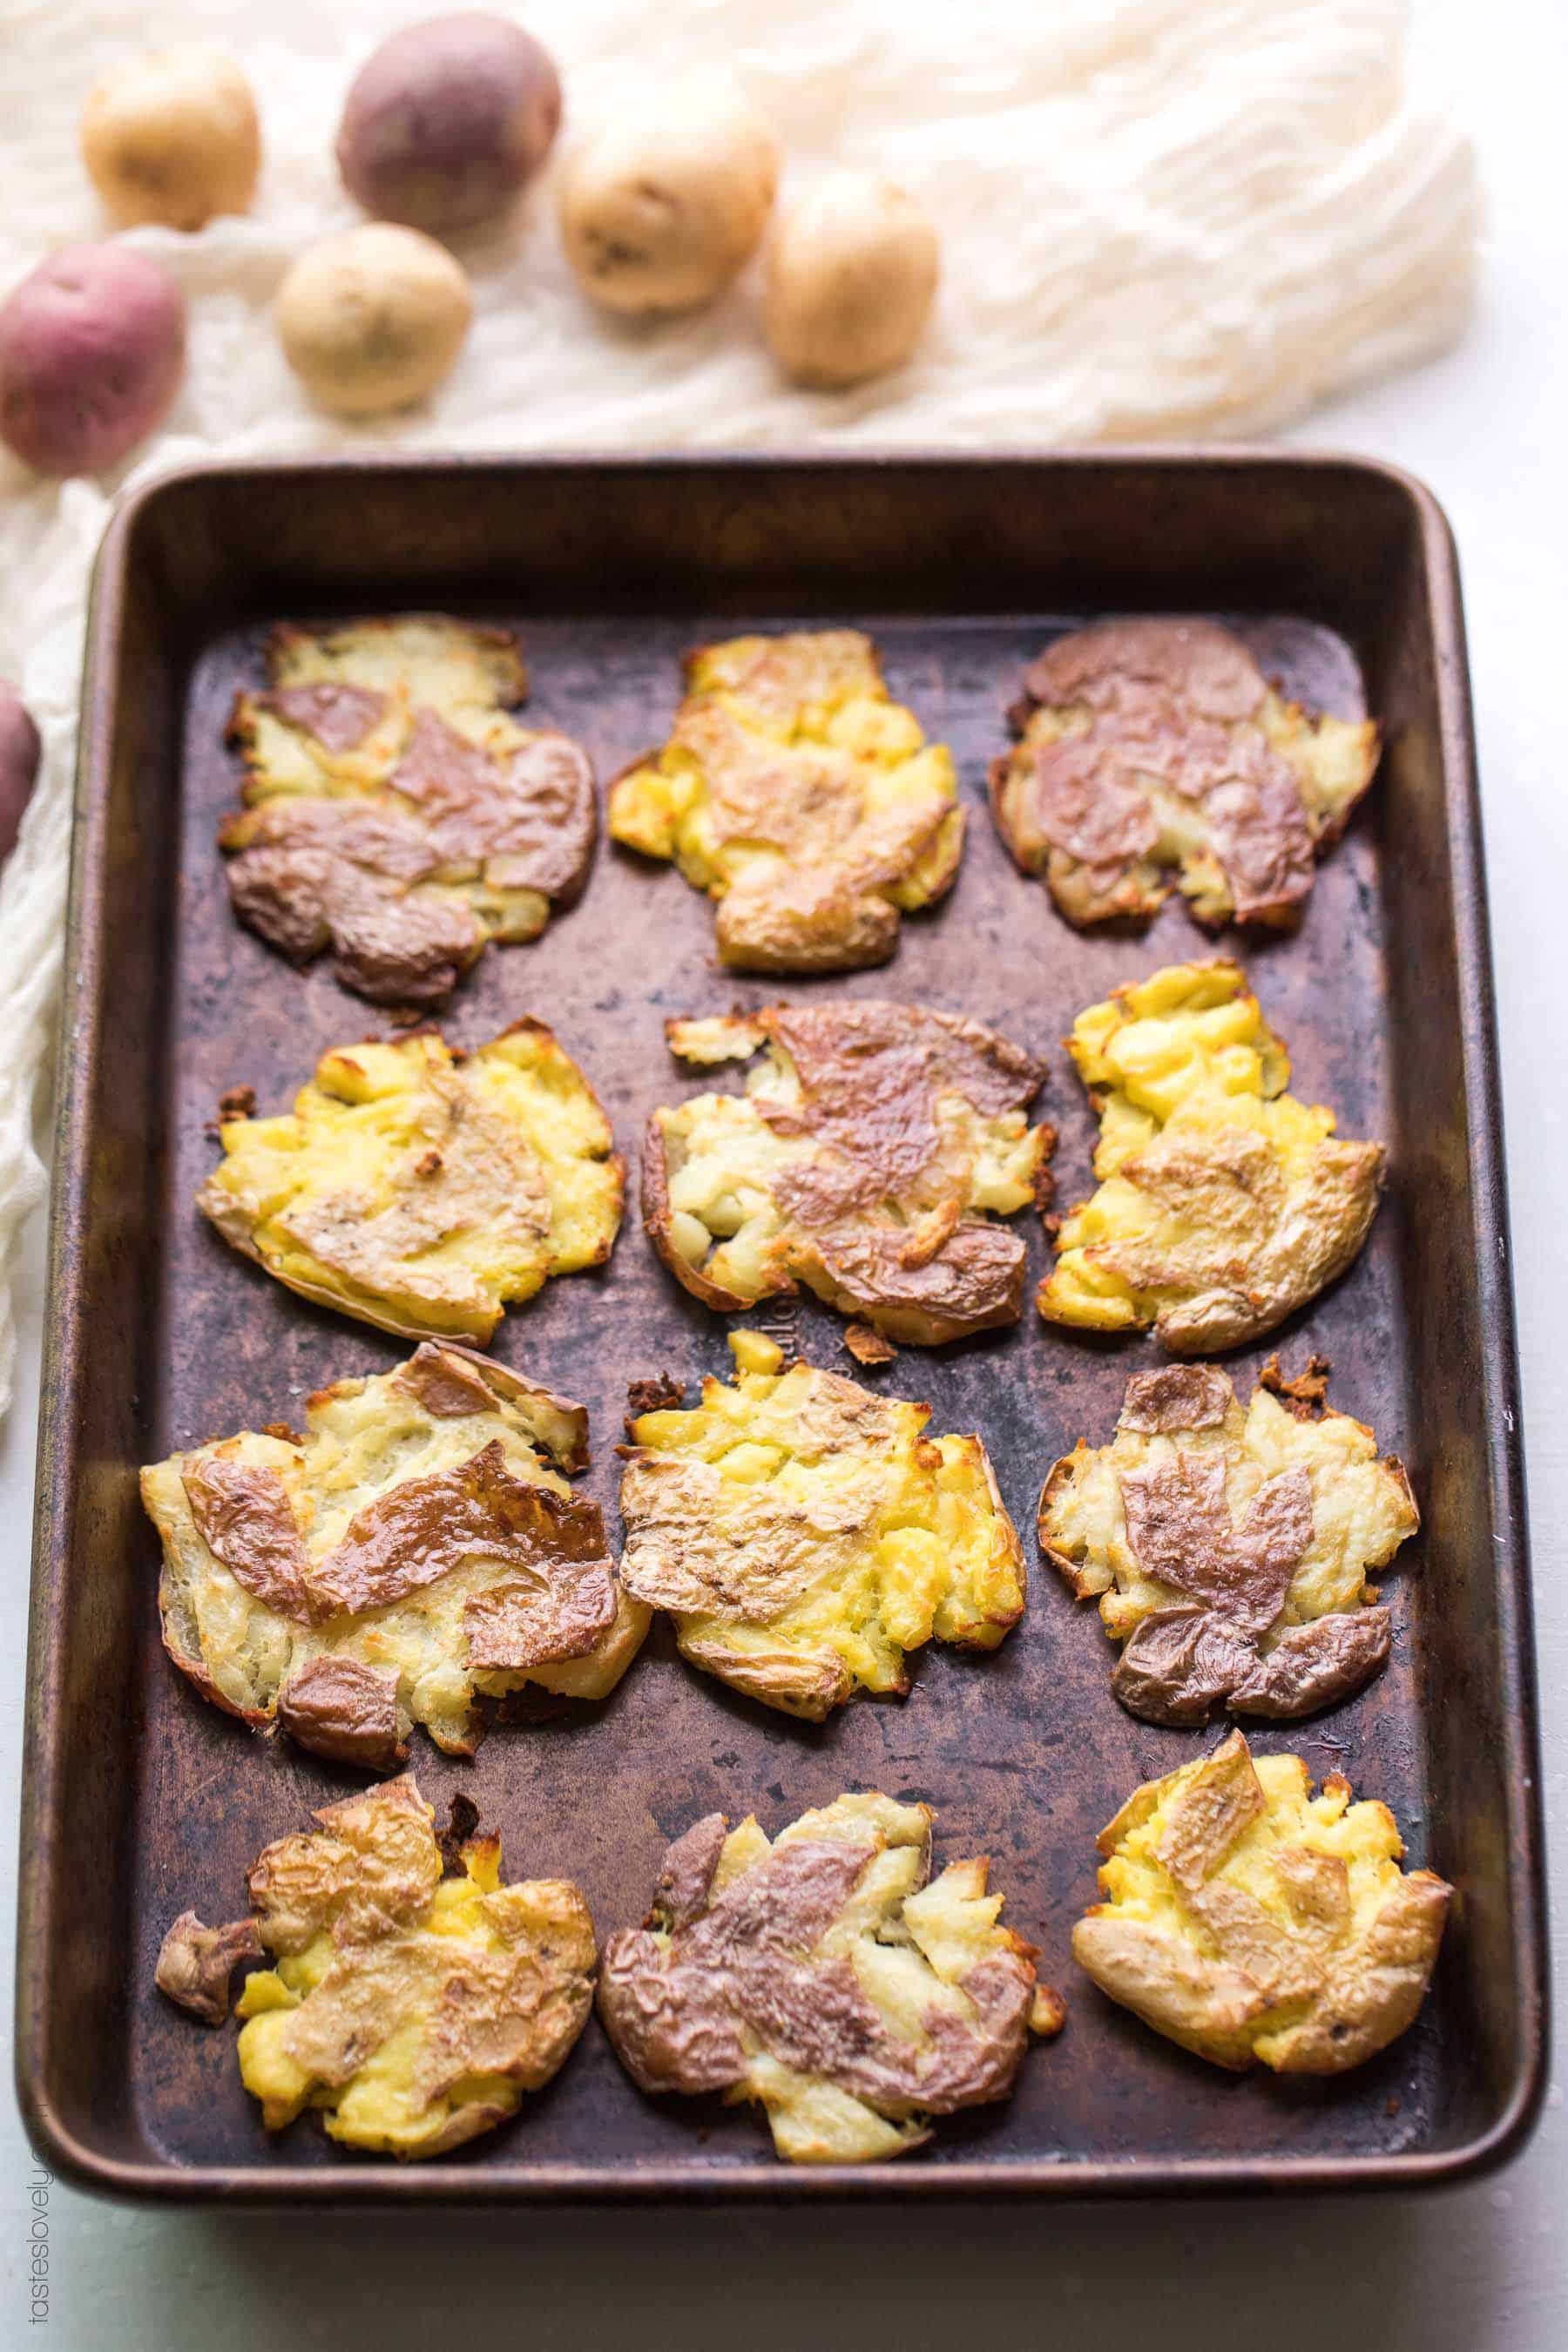 Paleo & Whole30 Crispy Smashed Potatoes - soft and fluffy on the outside, crispy and golden brown on the outside. The most delicious side dish recipe! Gluten free, grain free, dairy free, sugar free, clean eating, vegan.